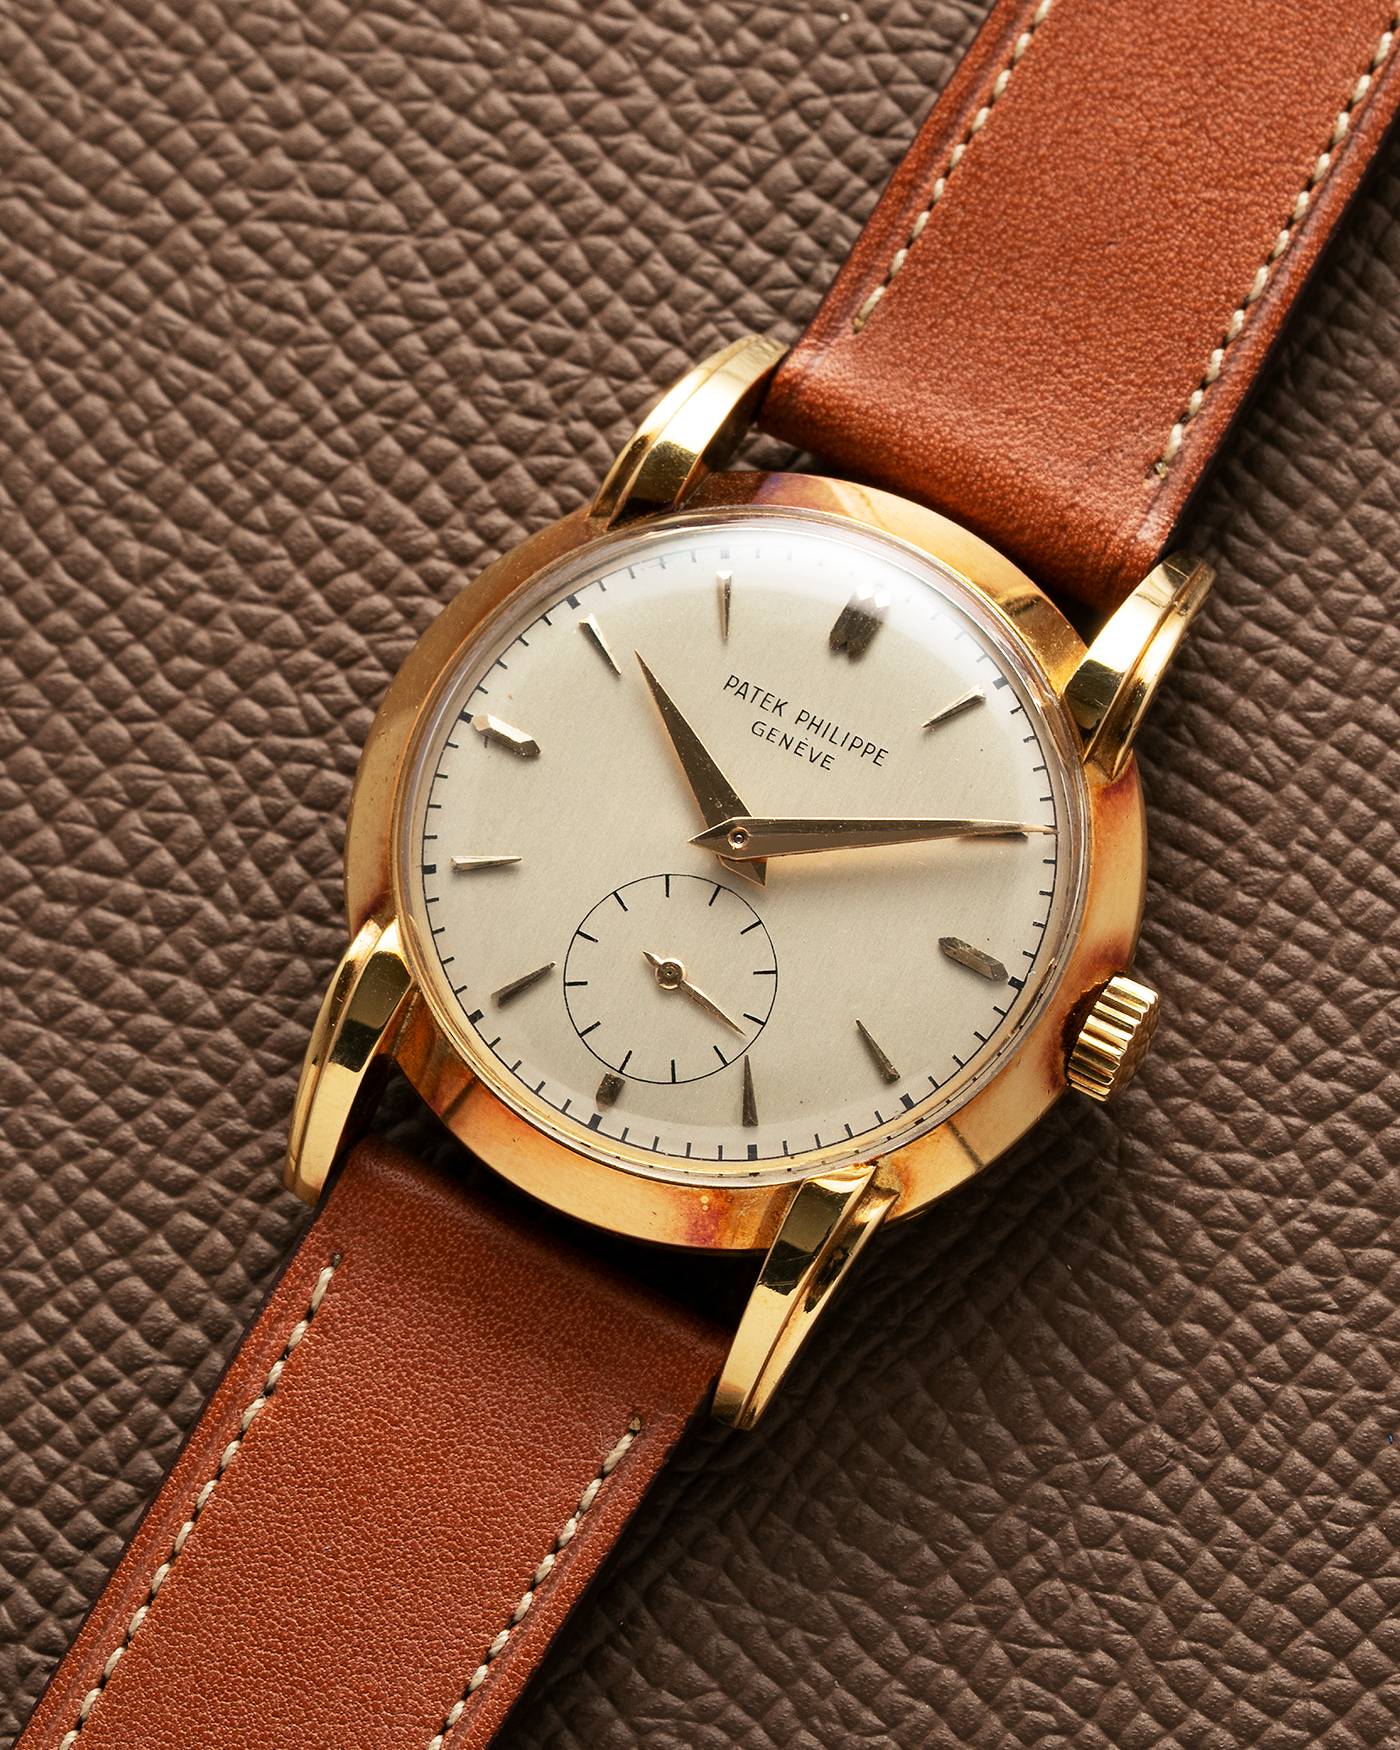 Brand: Patek Philippe Year: 1940 - 1950s Reference Number: 2429 Material: 18-carat Yellow Gold Movement: Cal. 10-200, Manual-Winding Case Diameter: 33mm Bracelet/Strap: Light Brown Nostime Calf Strap with 18k Patek Philippe 18-carat Yellow Gold Tang Buckle